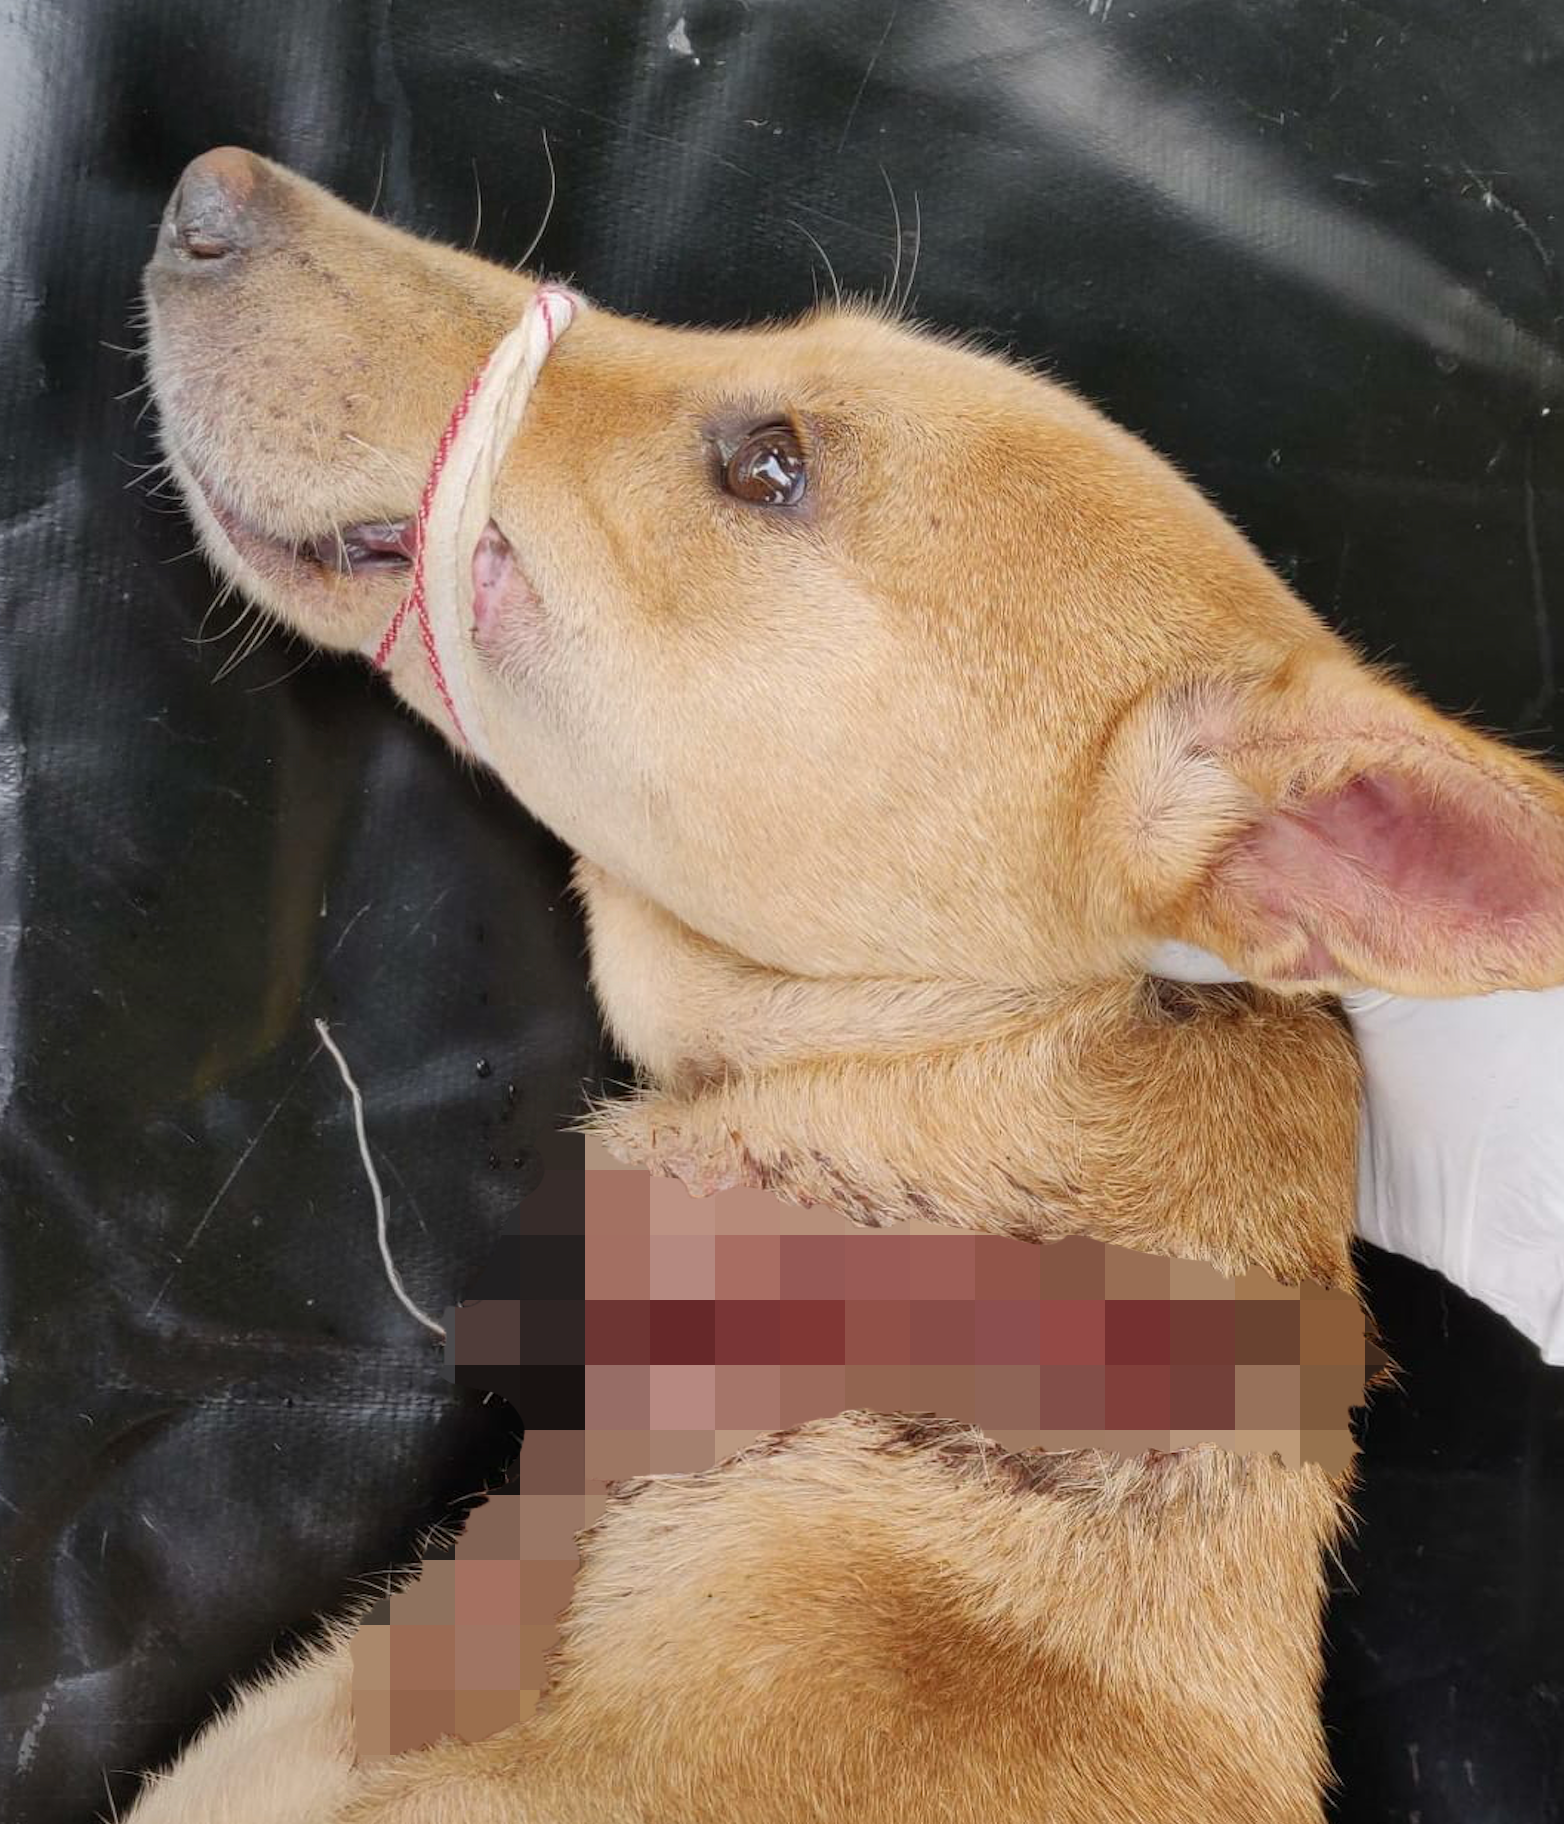 Dog Saved from Vicious Barbed Wire Stuck Around Her Neck